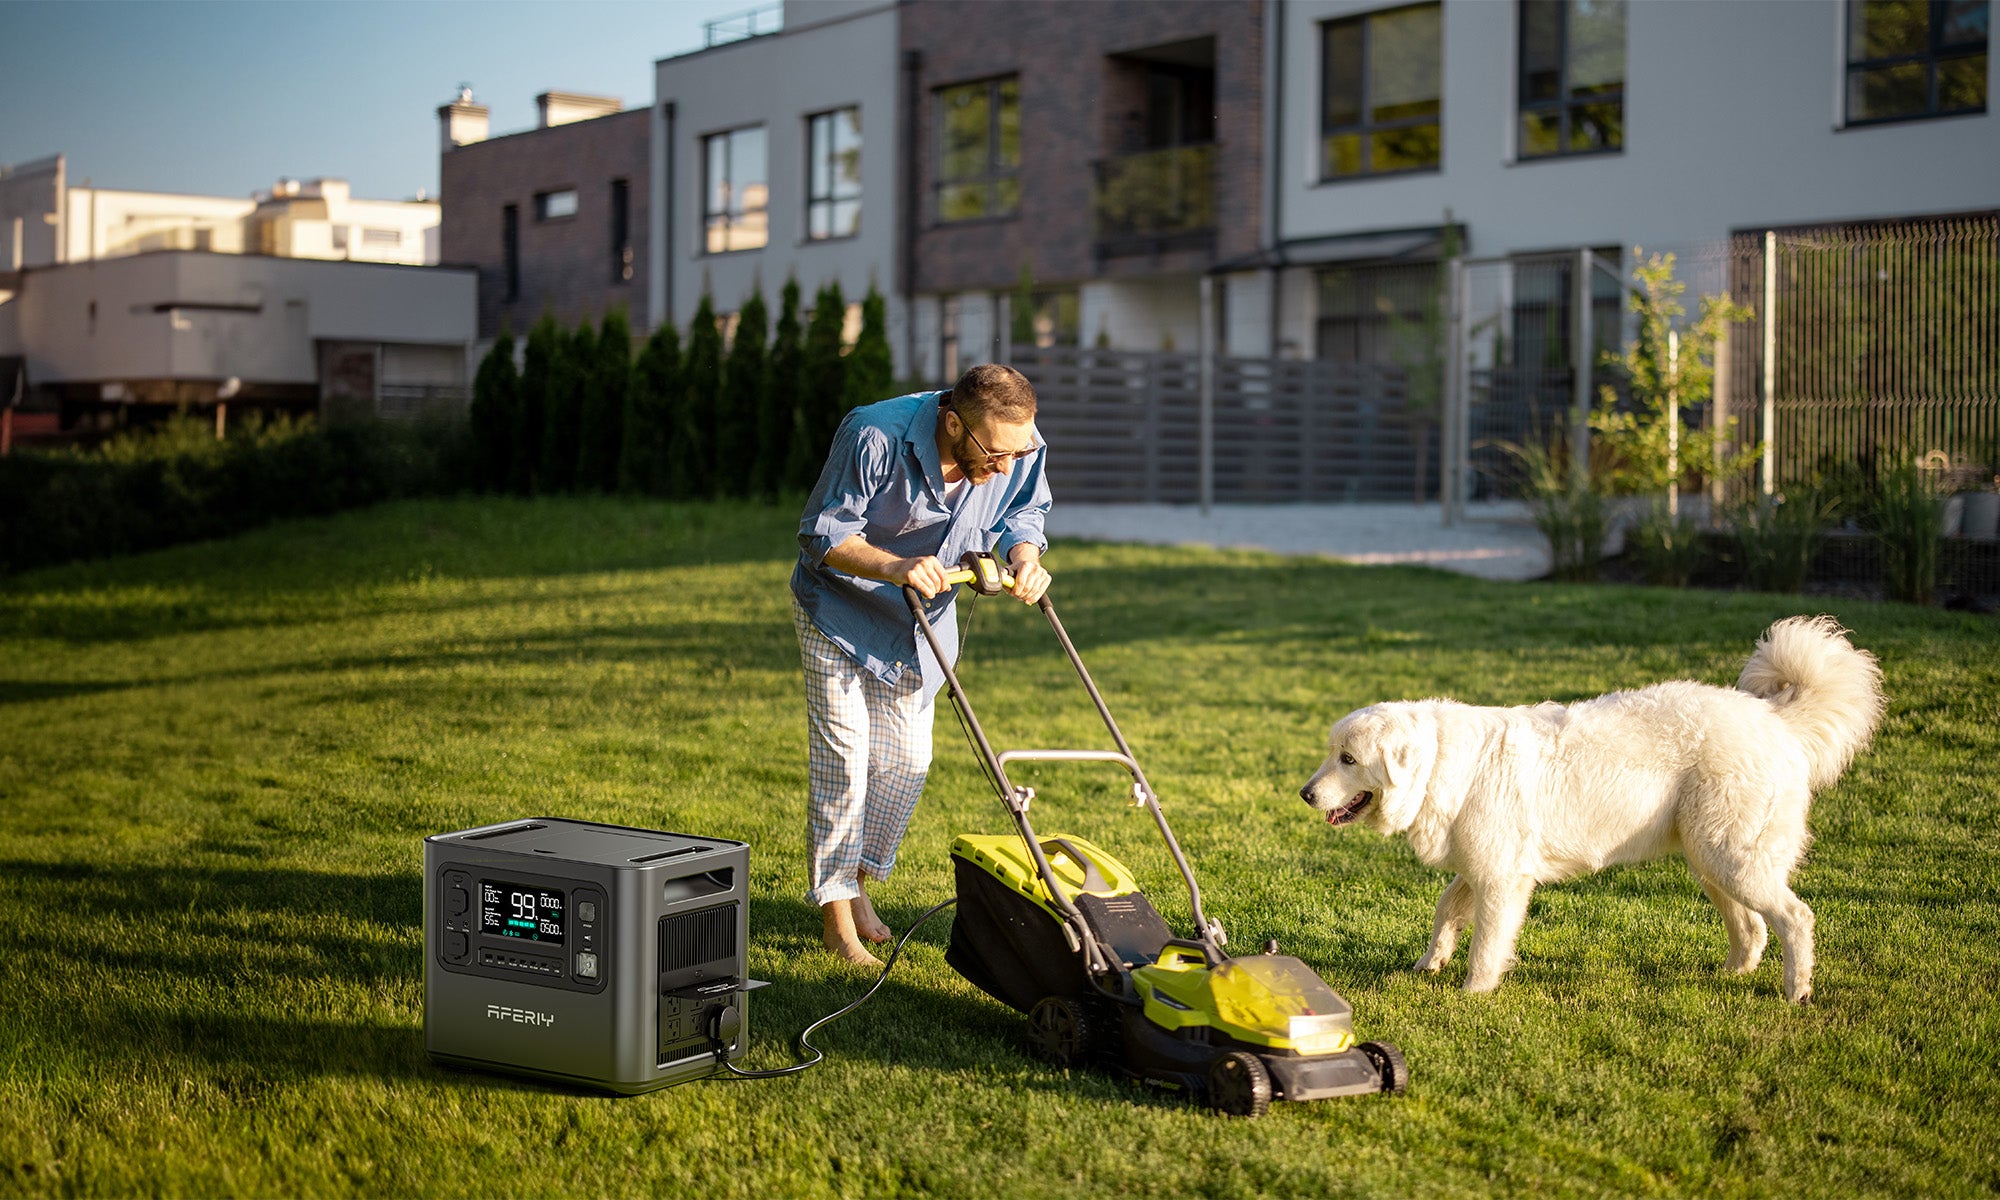 The higher output wattage of a portable power station allows you to power higher-wattage appliances